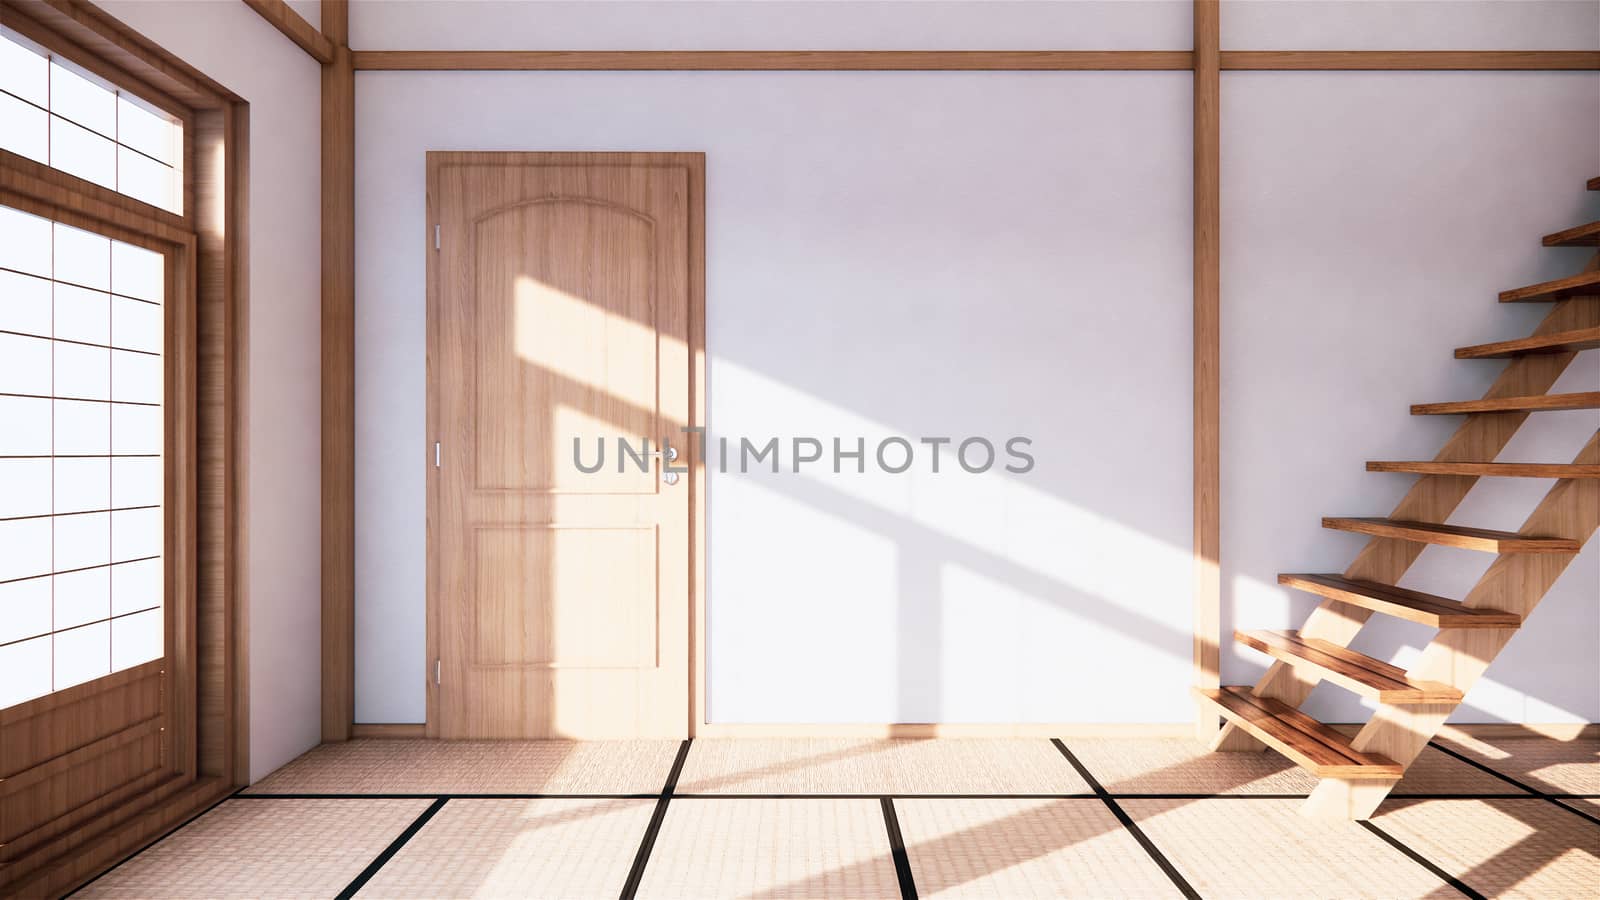 Japanese-style interior of the first floor in a two-story house. 3D rendering